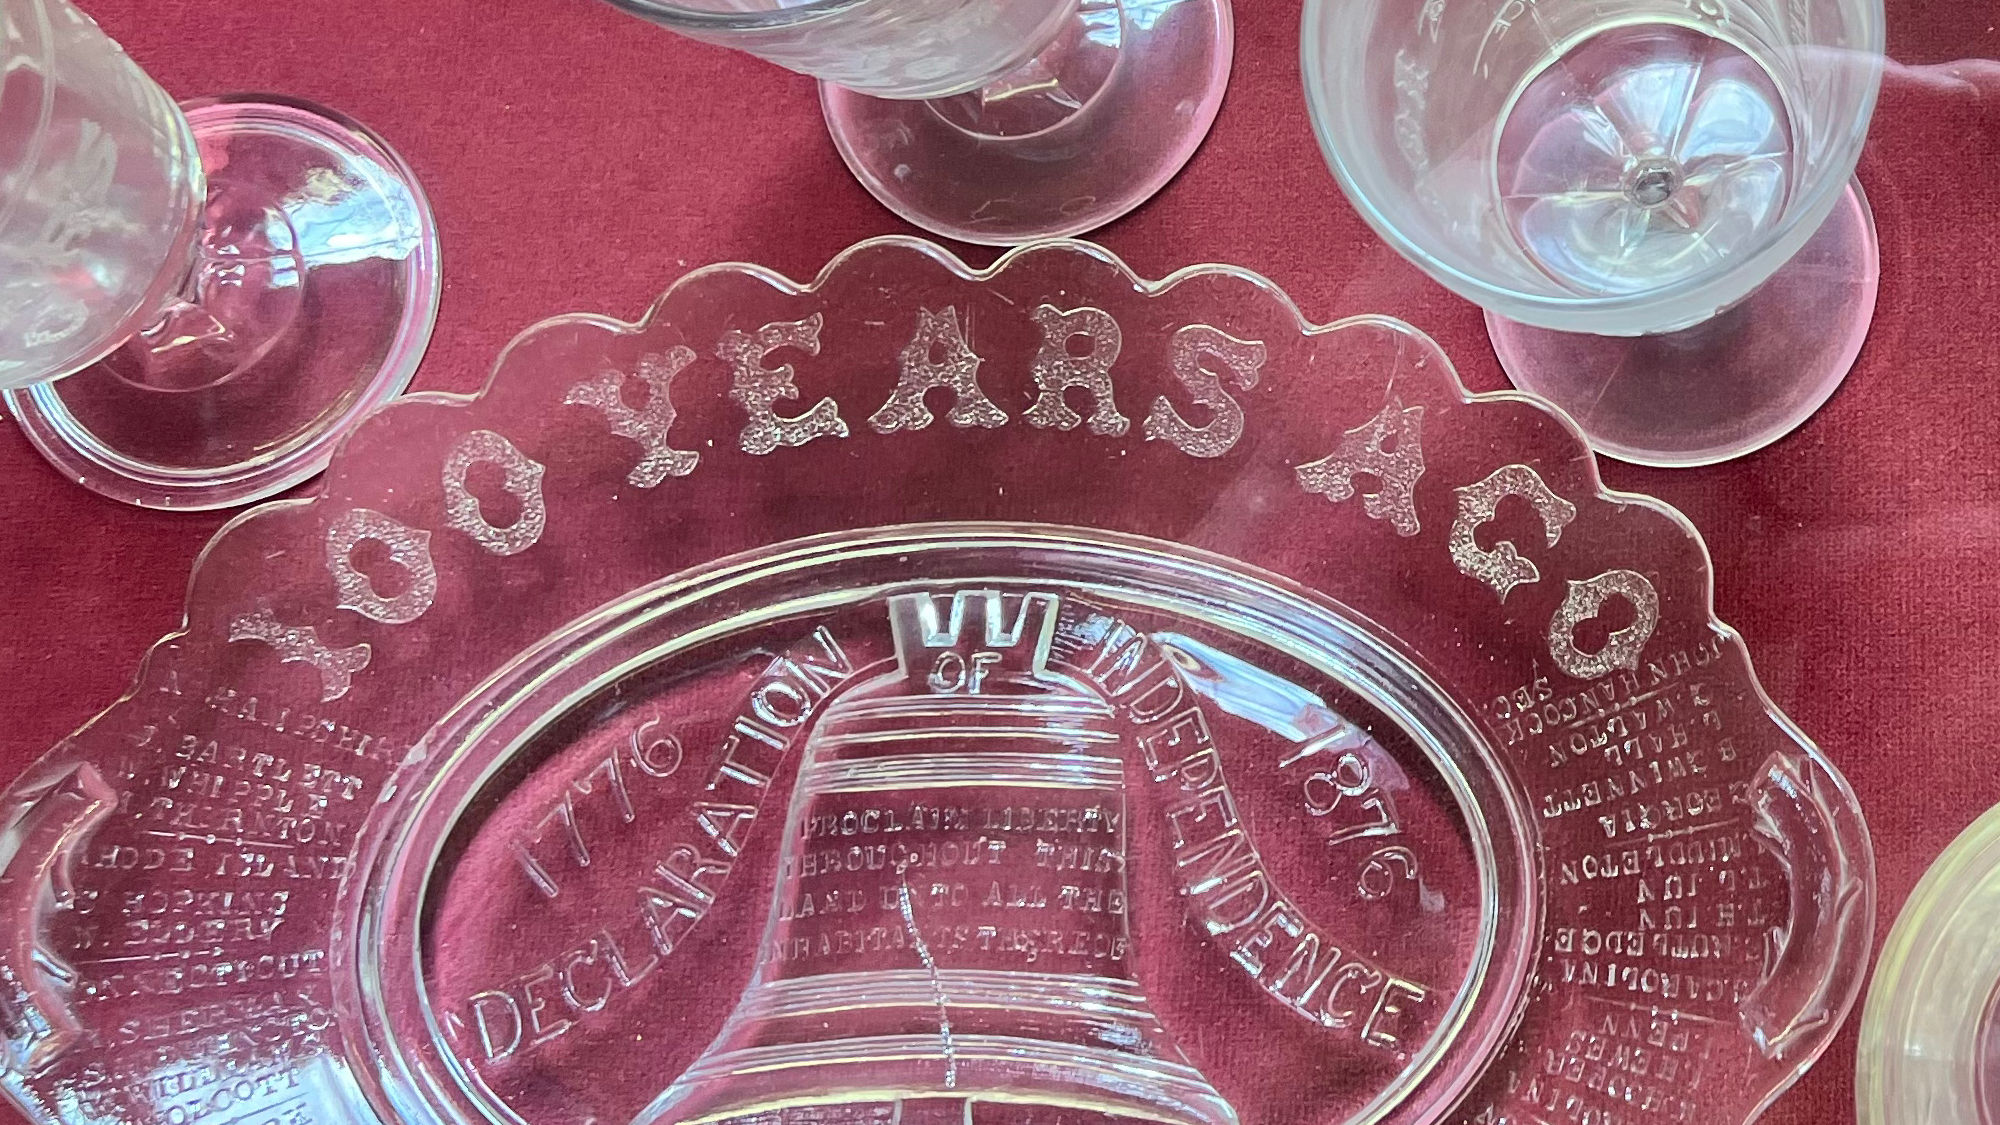 Independence Hall Museum Commemorative Glassware